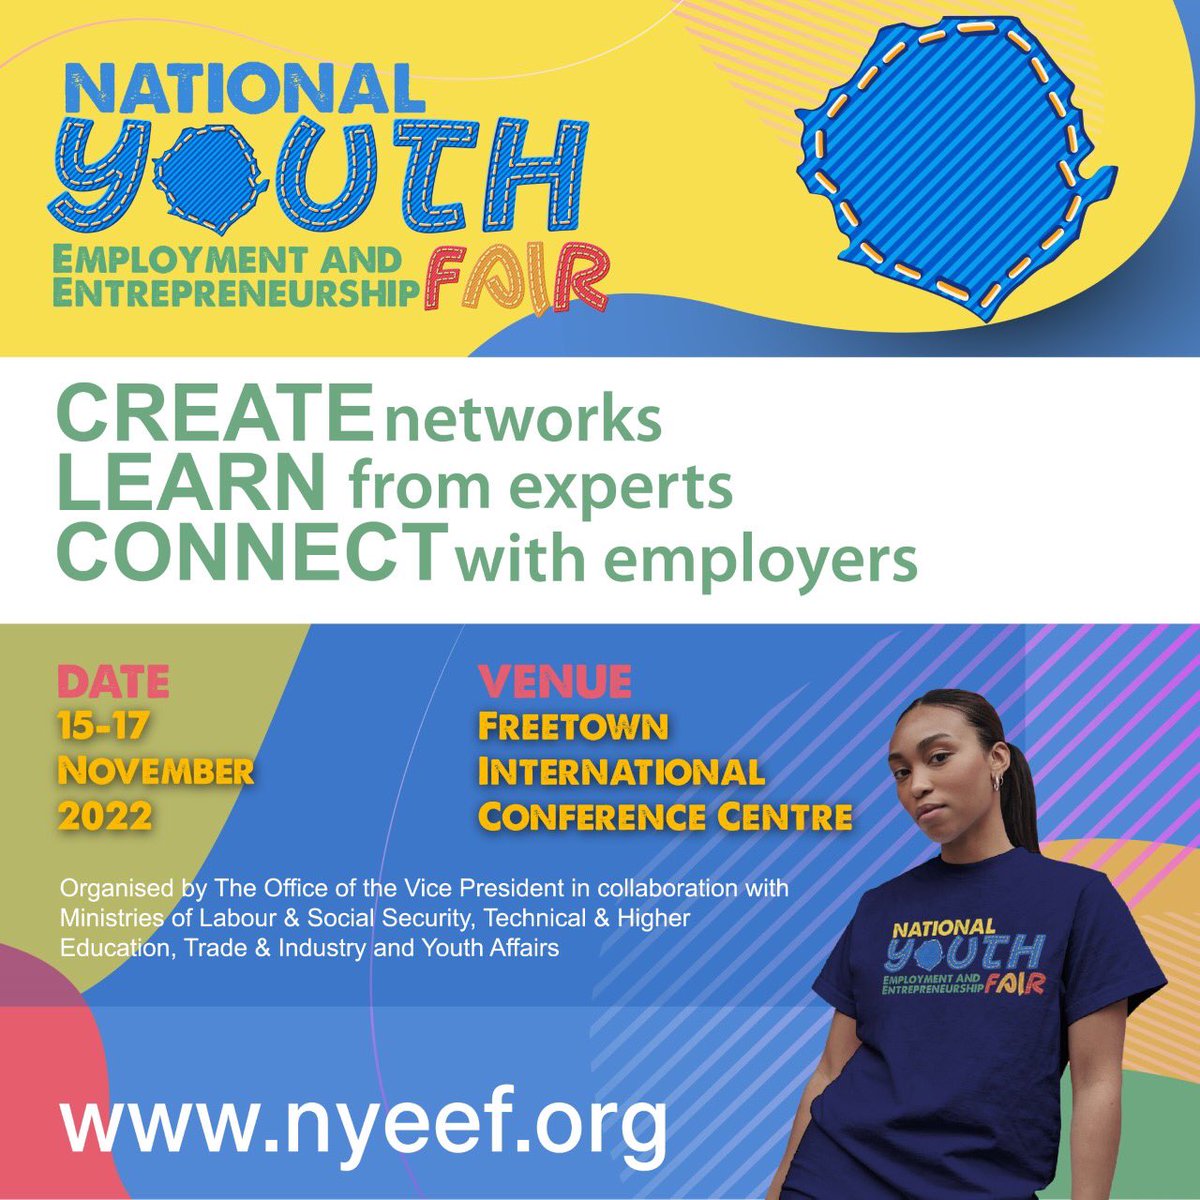 Have you seen this already? Great opportunity for jobseekers and entrepreneurs, youths. Register at nyeef.org Goodluck! #salonetwitter #Entrepreneur #Employment #opportunities #employers #Youth